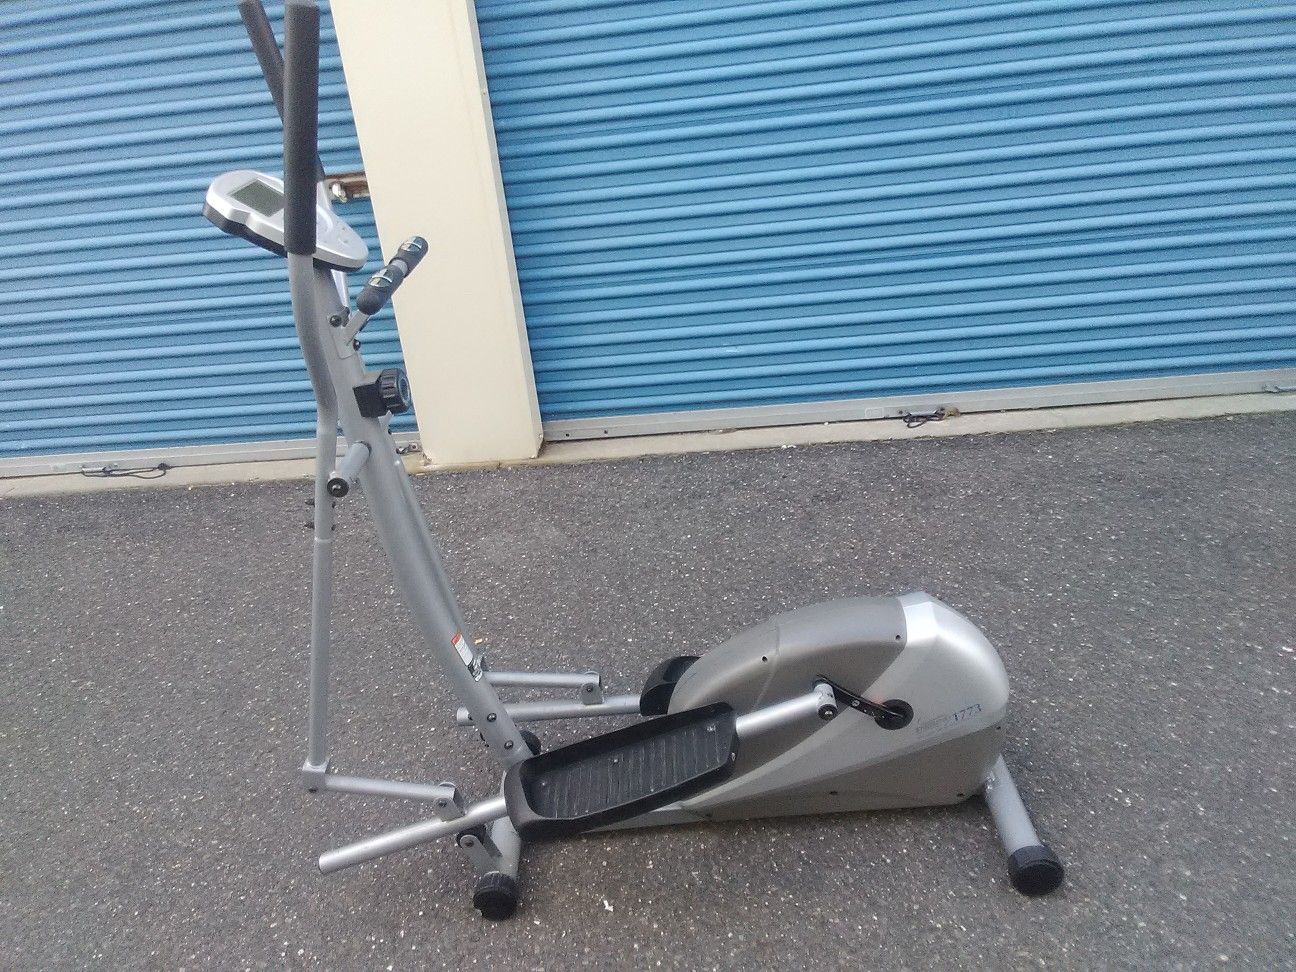 Lightweight elliptical excellent condition monitors your progress ideal for in home workouts pick-up or delivery possible